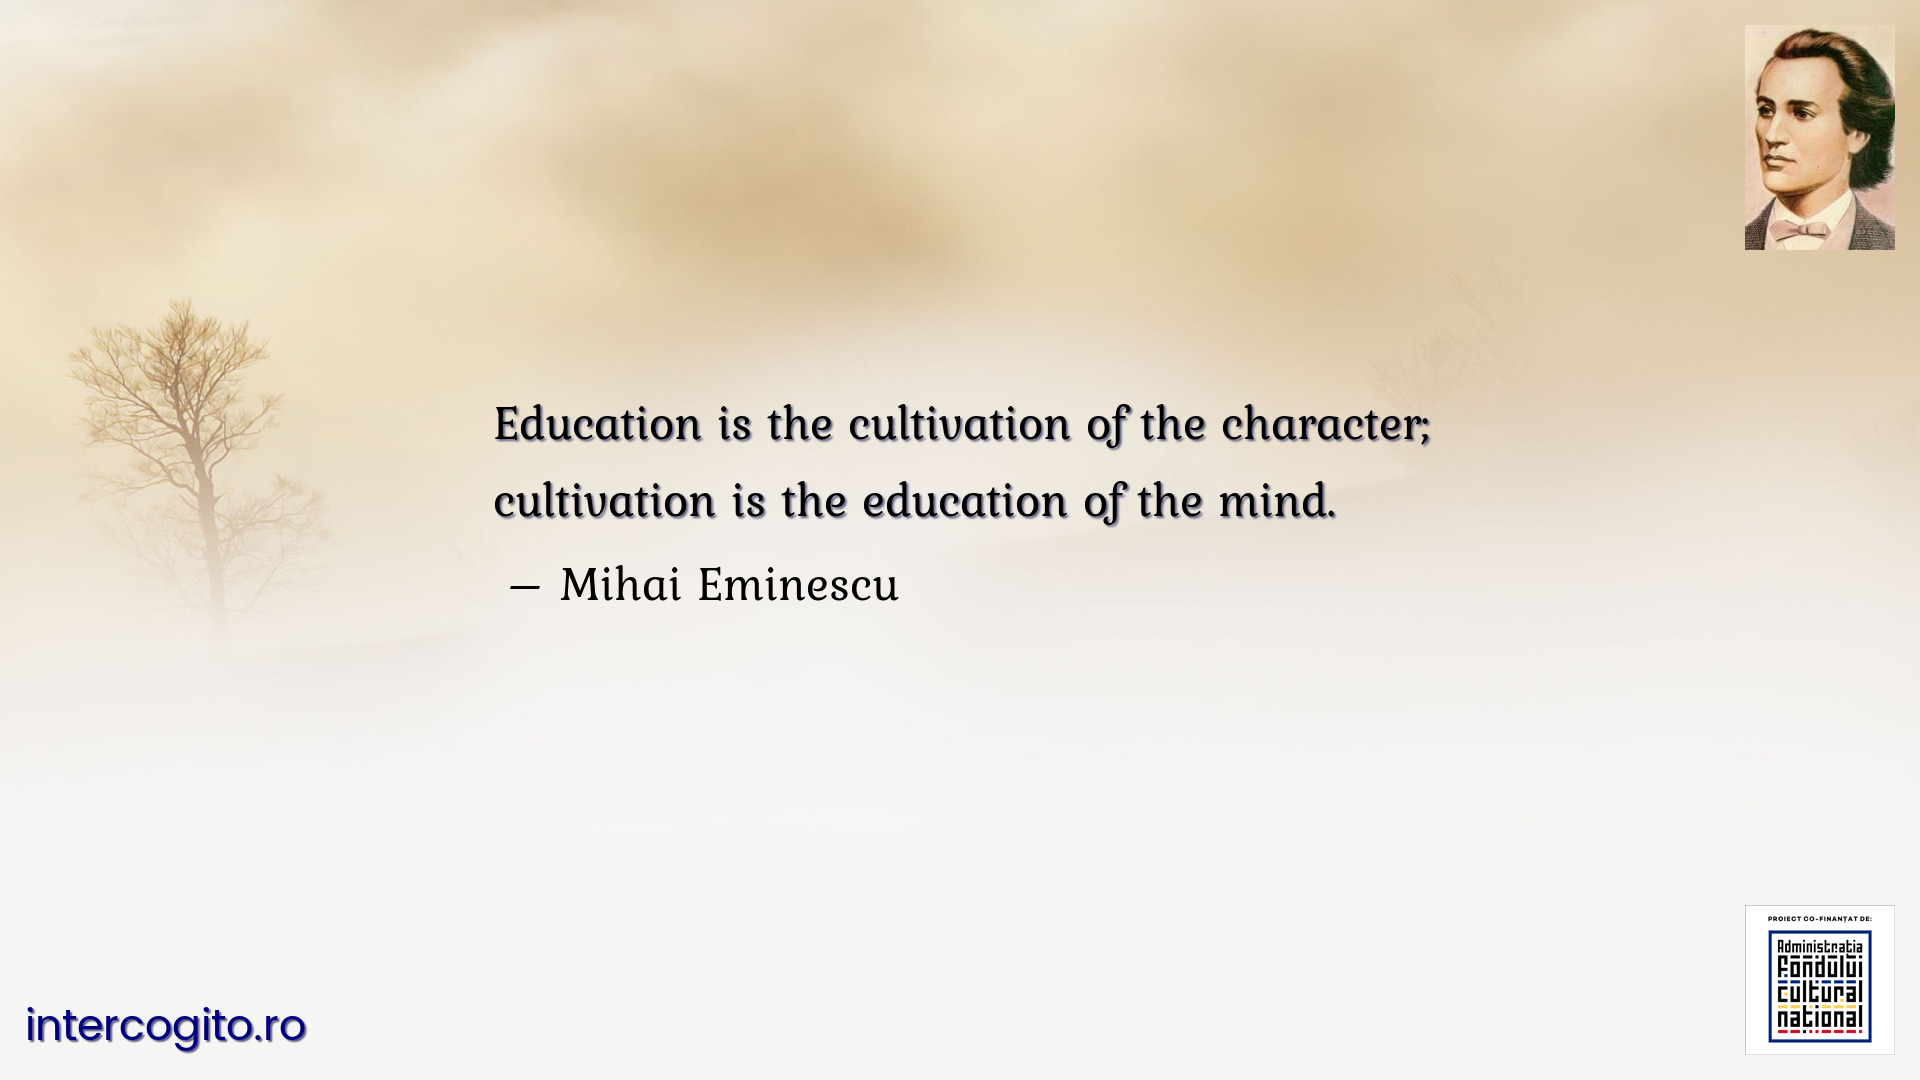 Education is the cultivation of the character; cultivation is the education of the mind.